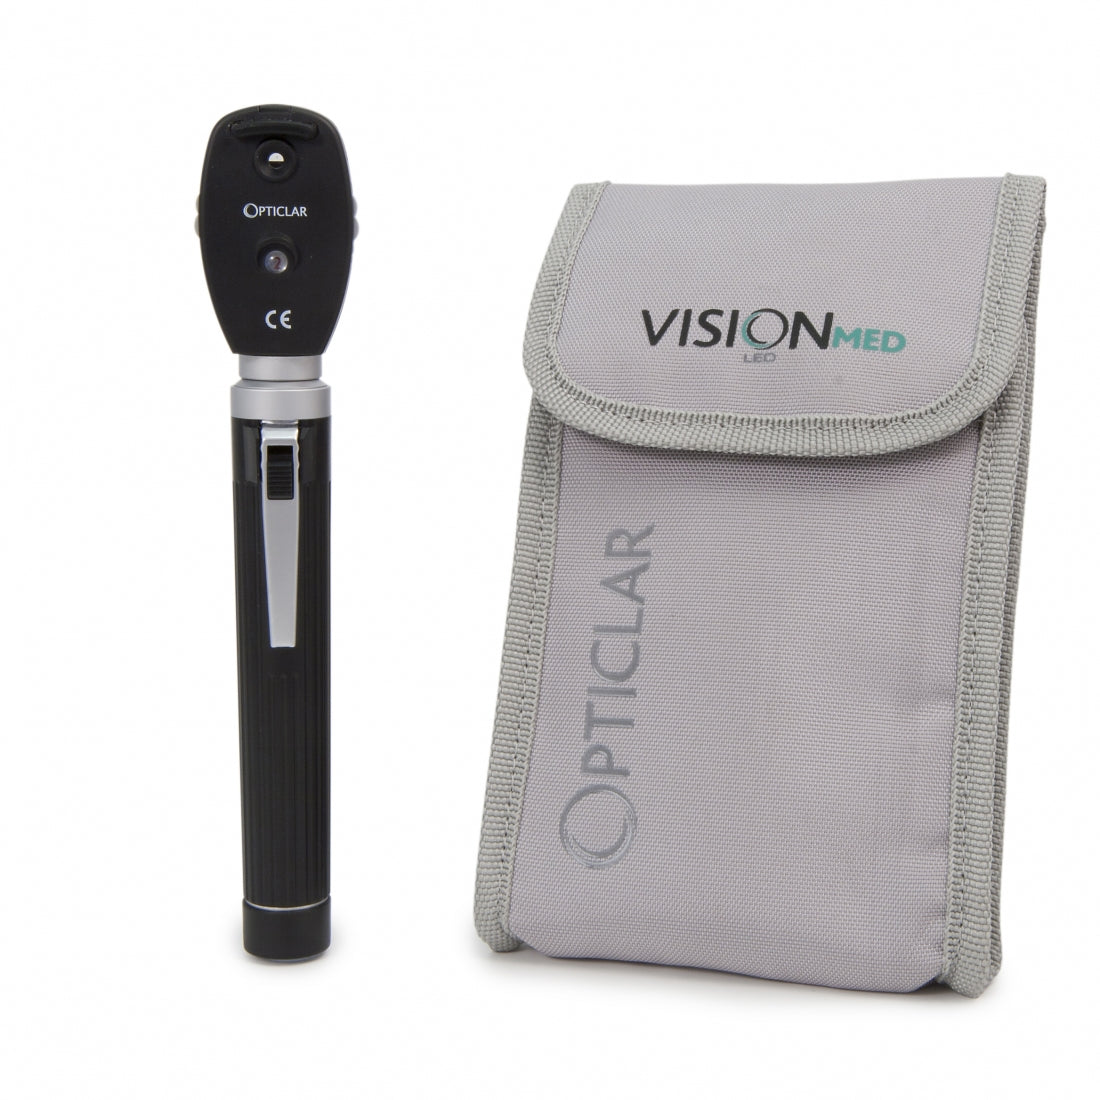 Opticlar - Pocket Ophthalmoscope Set - AA Battery Handle, Pouch